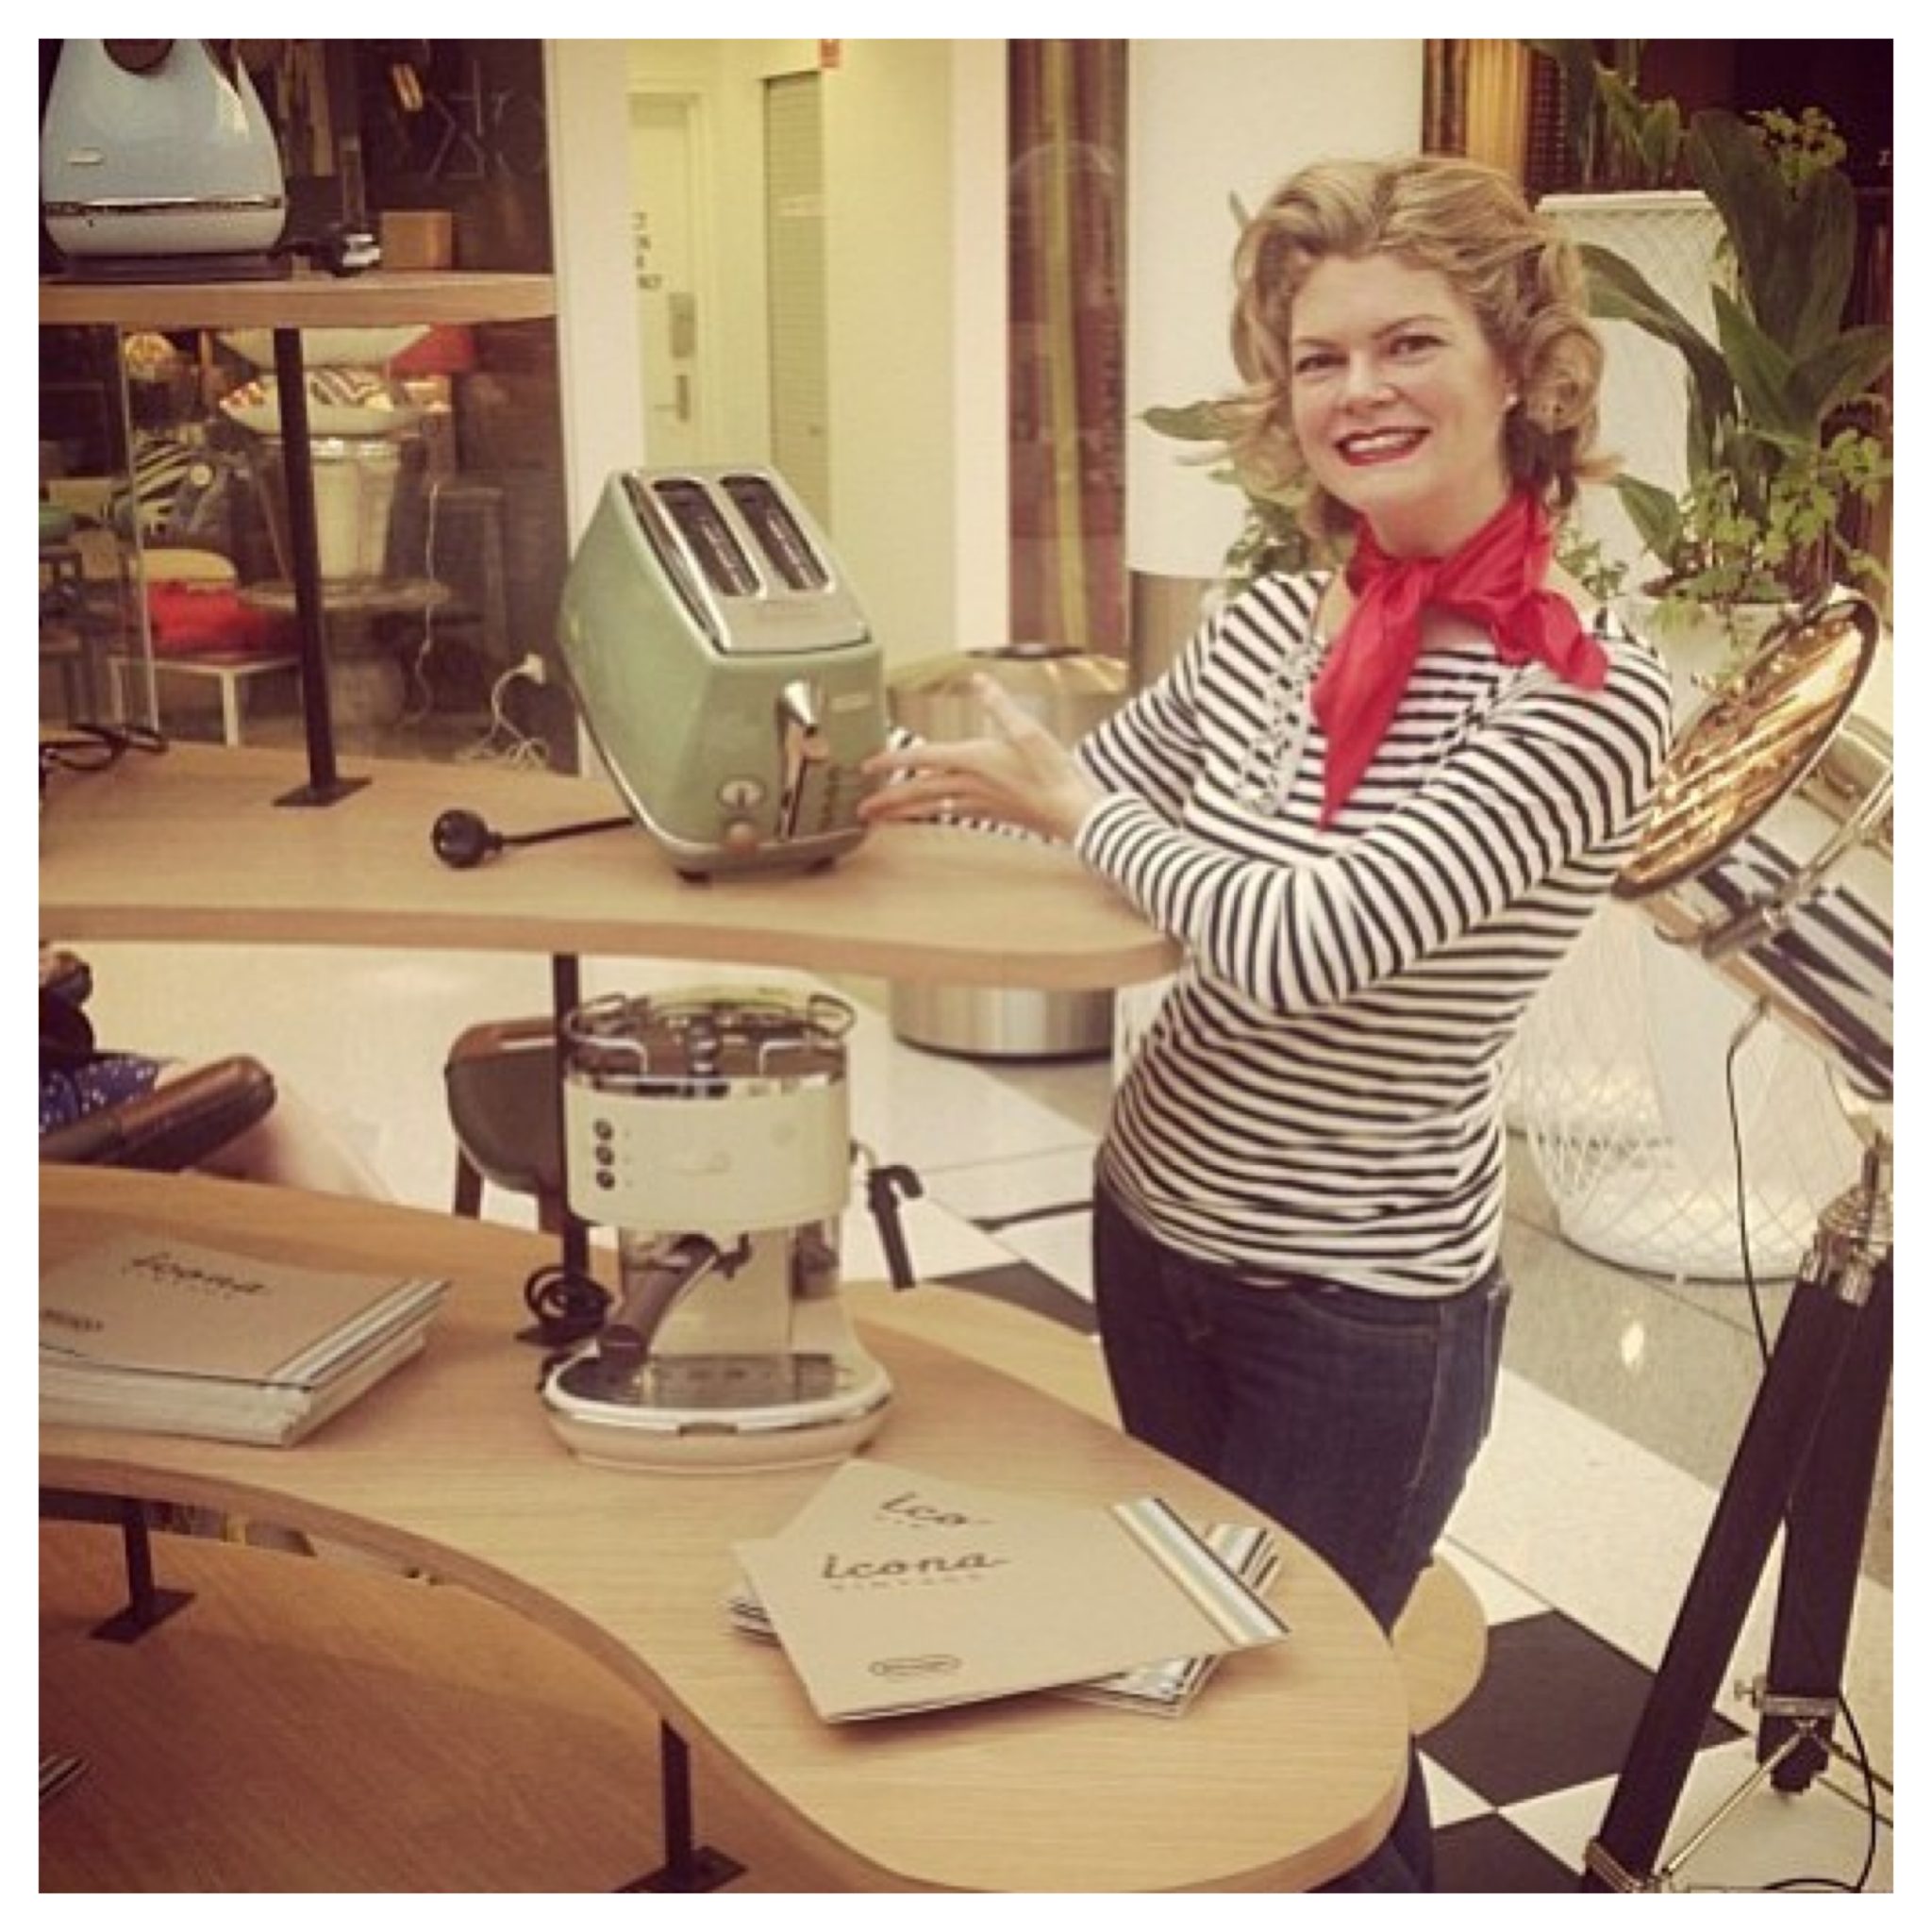 Interiors Addict reader Dee looking glam at our free event